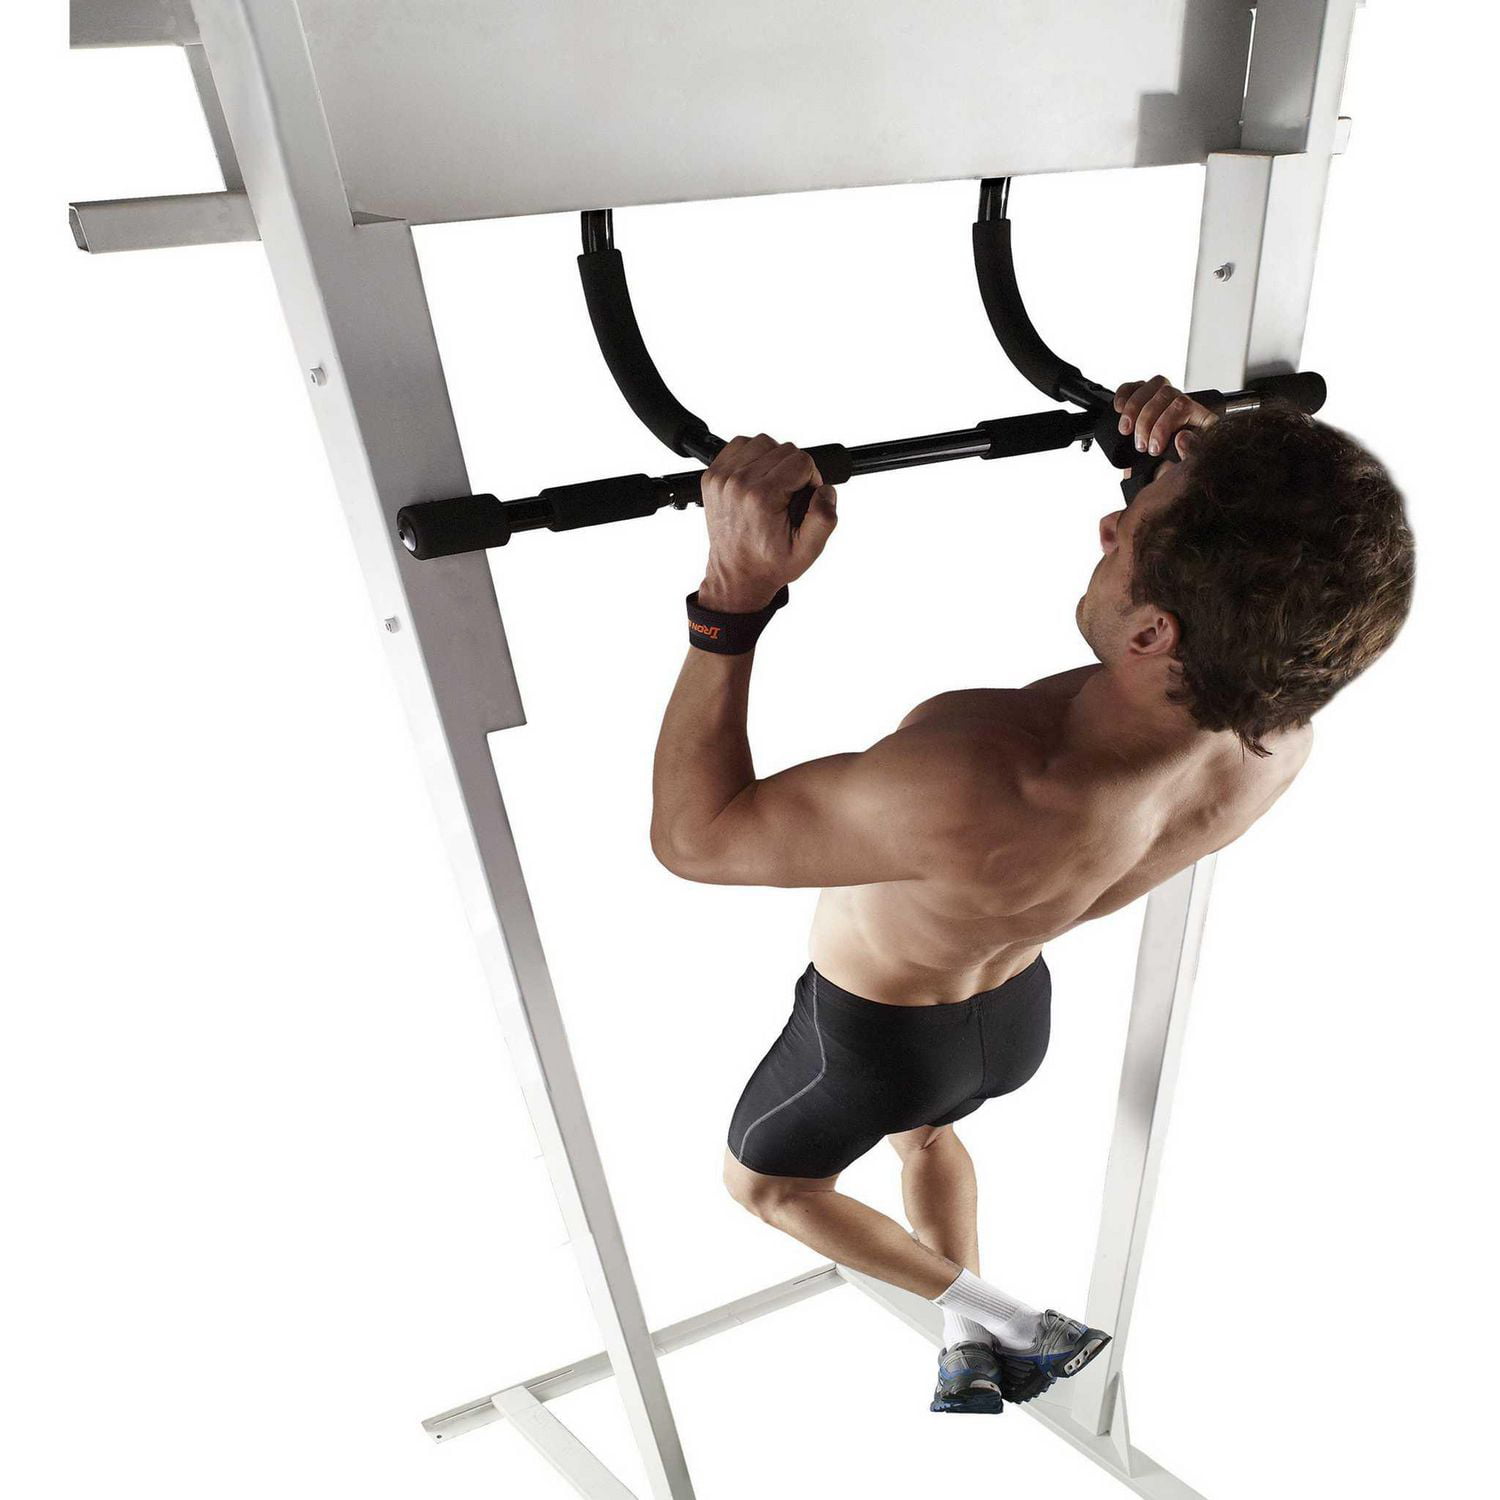 Iron Body Pull Up Bar Door Gym - Total Upper Body Home Workout Trainer 